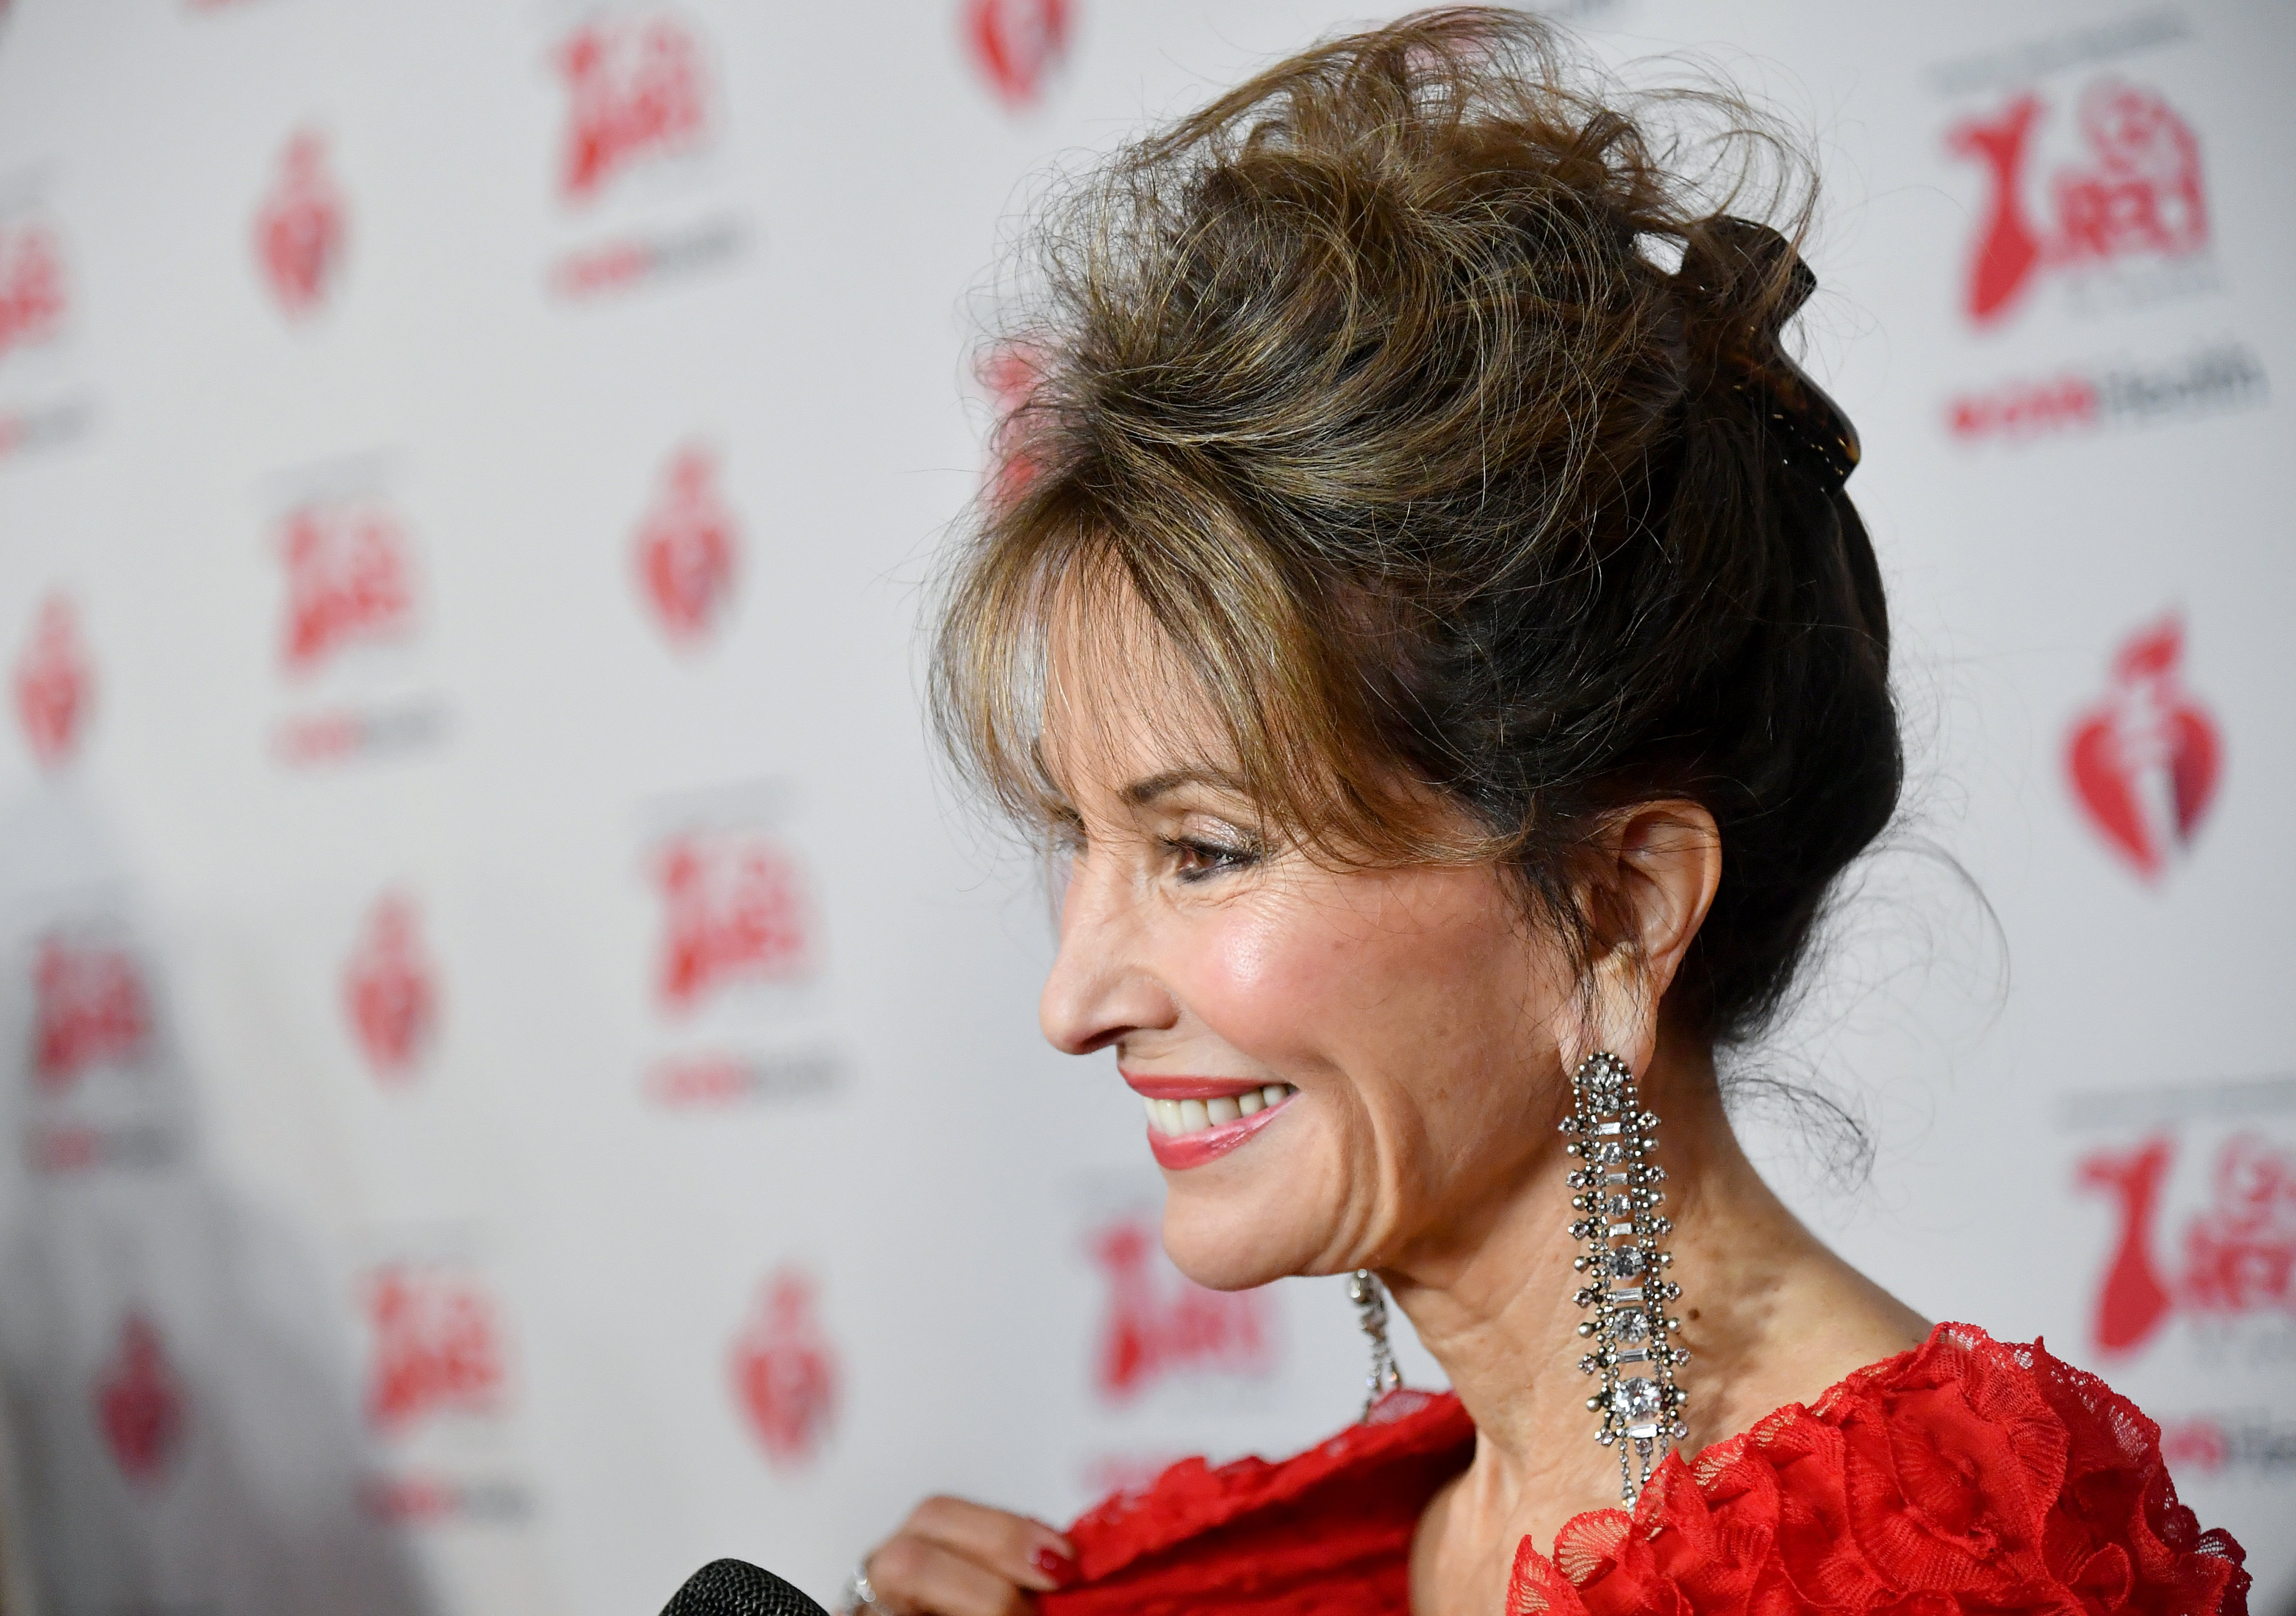 Susan Lucci attends The American Heart Association's Go Red for Women Red Dress Collection 2020 at Hammerstein Ballroom on February 05, 2020 in New York City. | Source: Getty Images